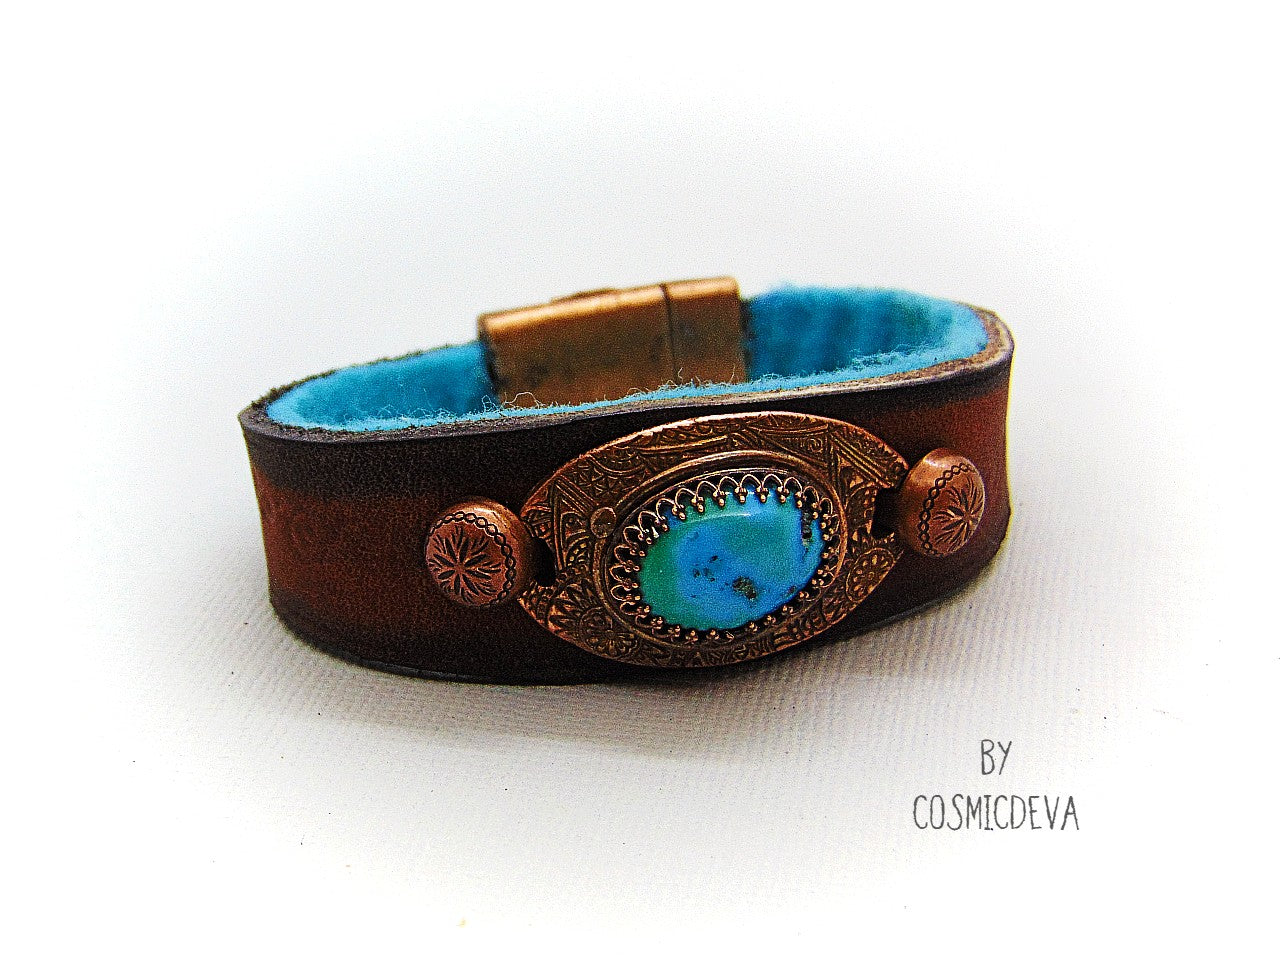 Turquoise Thin Triple Wrap Leather Cuff Bracelet - Bloom Jewelry